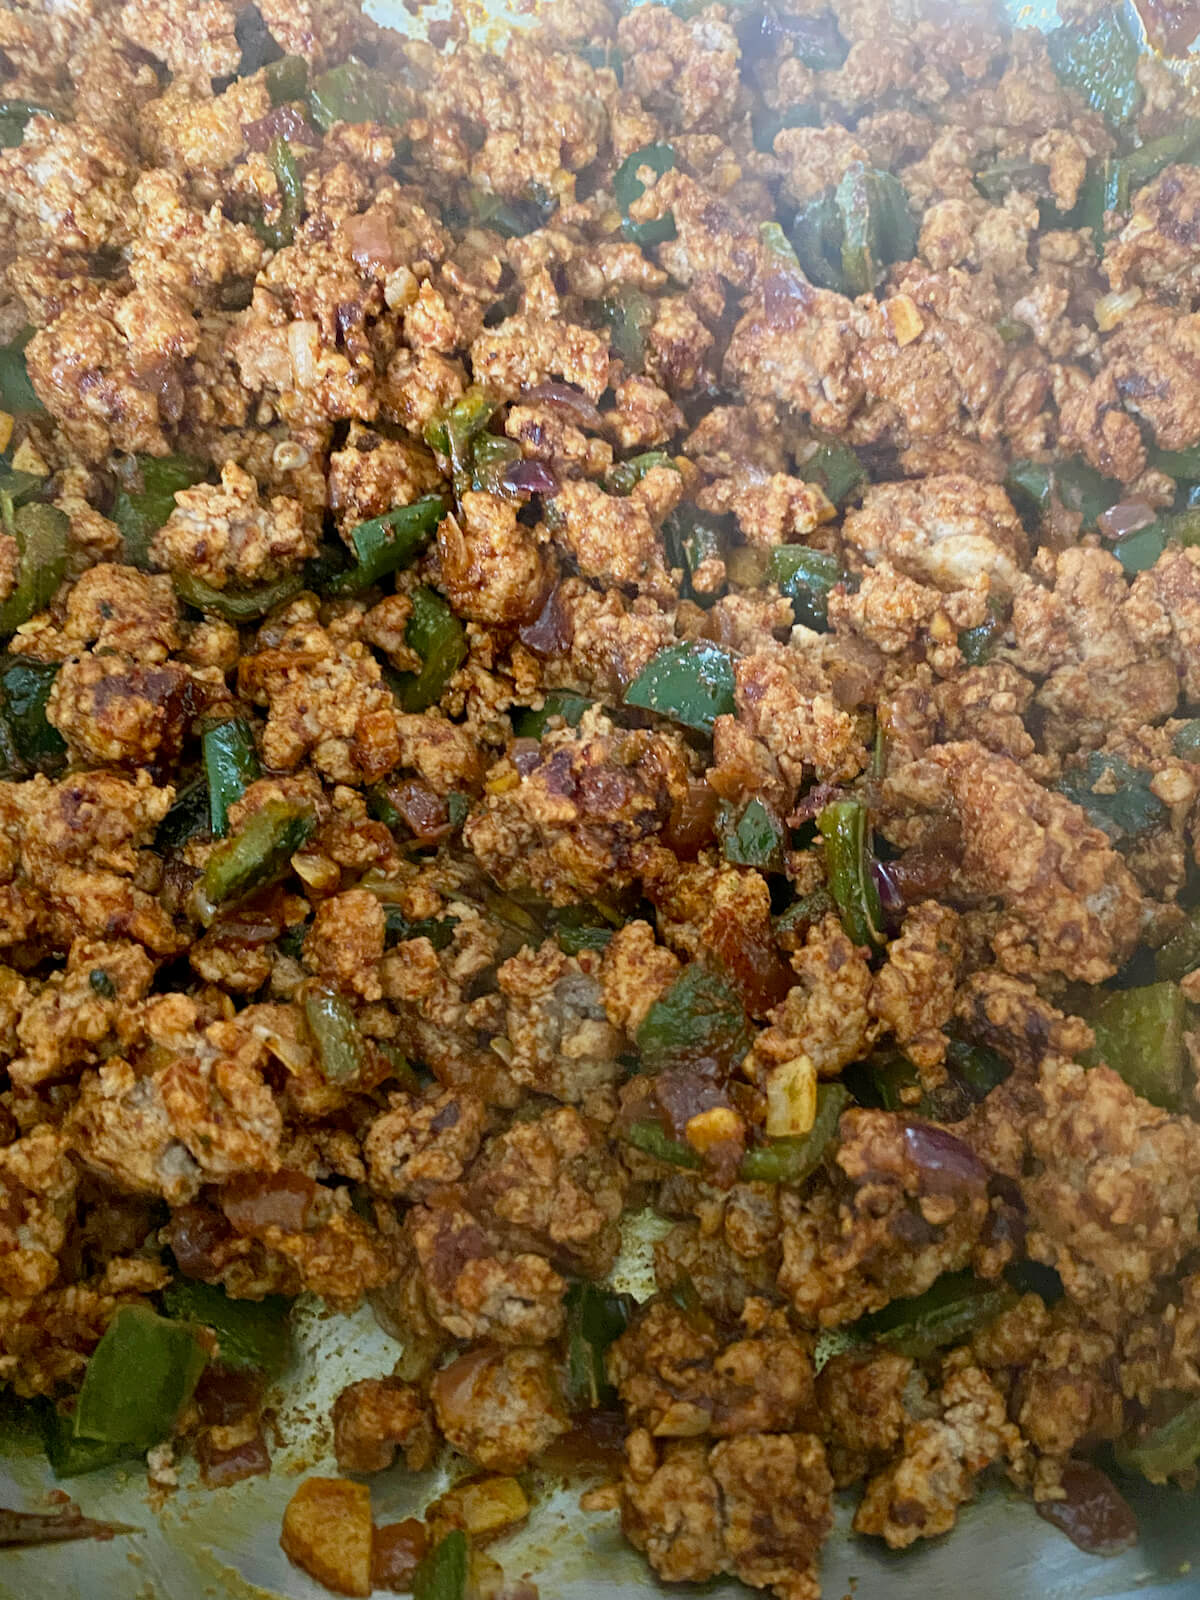 Ground turkey and vegetables seasoned with chili powder, cumin, and other spices.